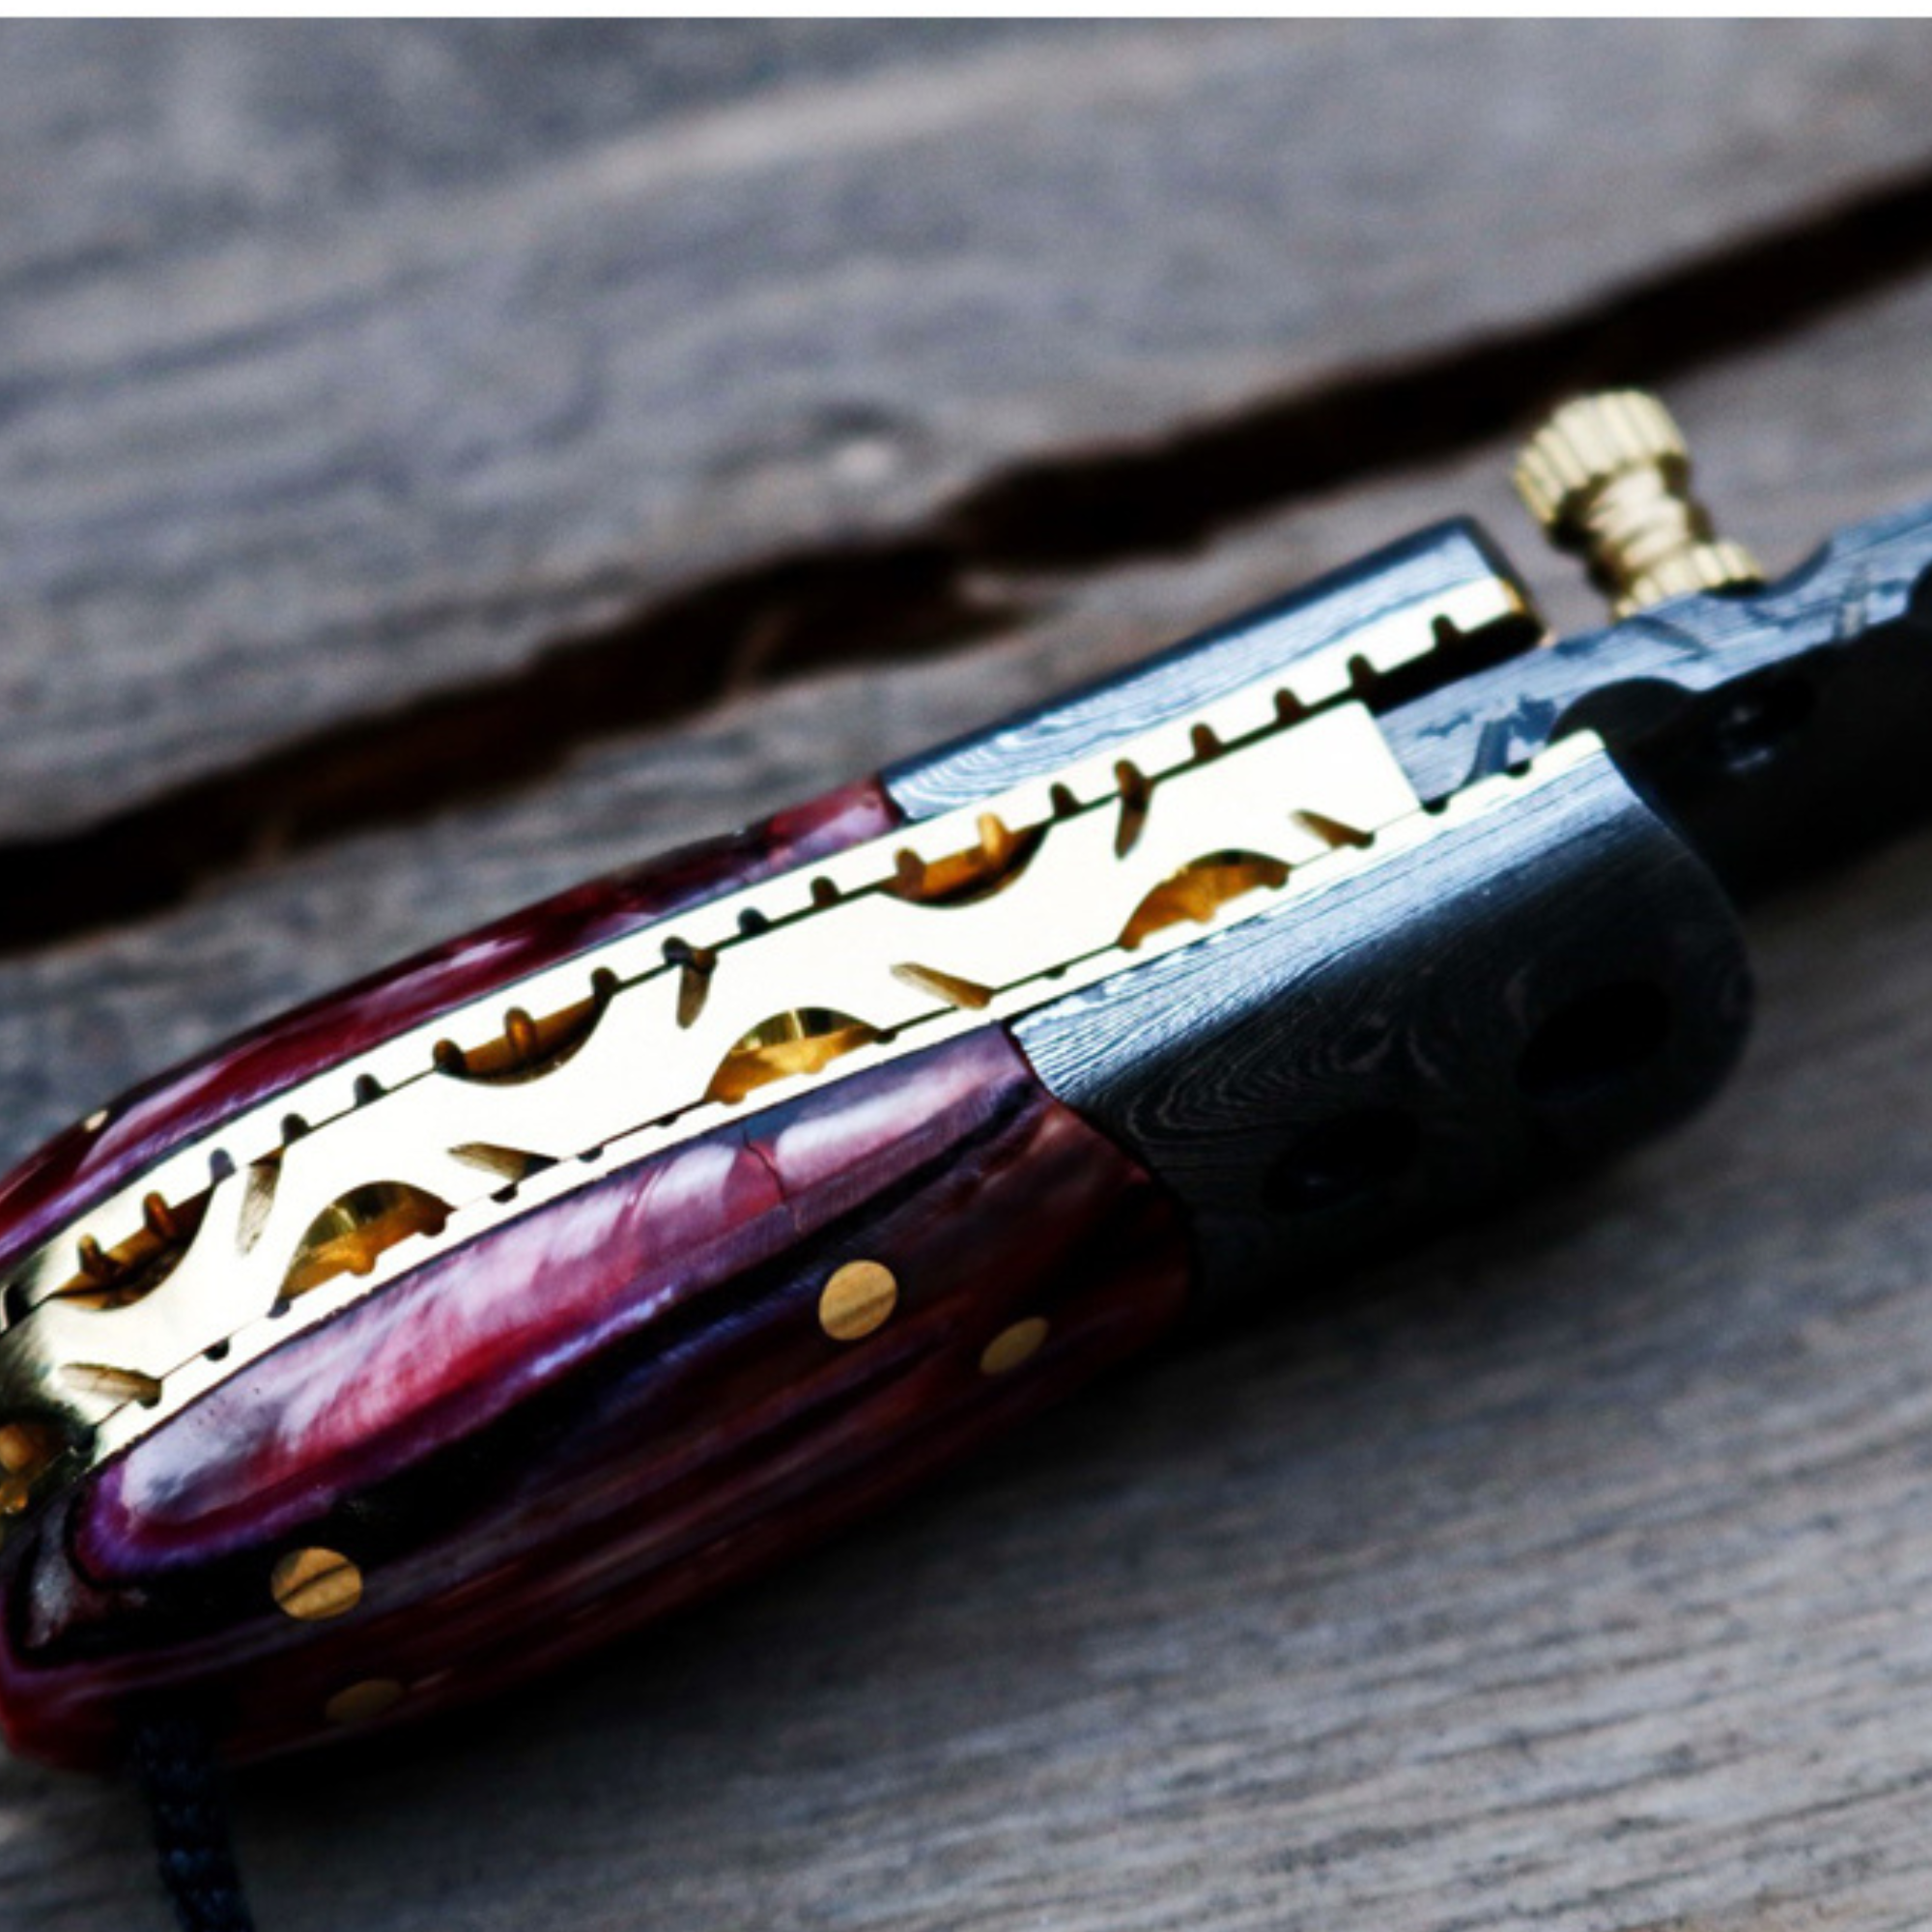 RED Tsetse Fly 1.2 Inches Blade Damascus Neck Knives Handmade Damascus Pocket Folding Knife with Mammoth Tooth Handle